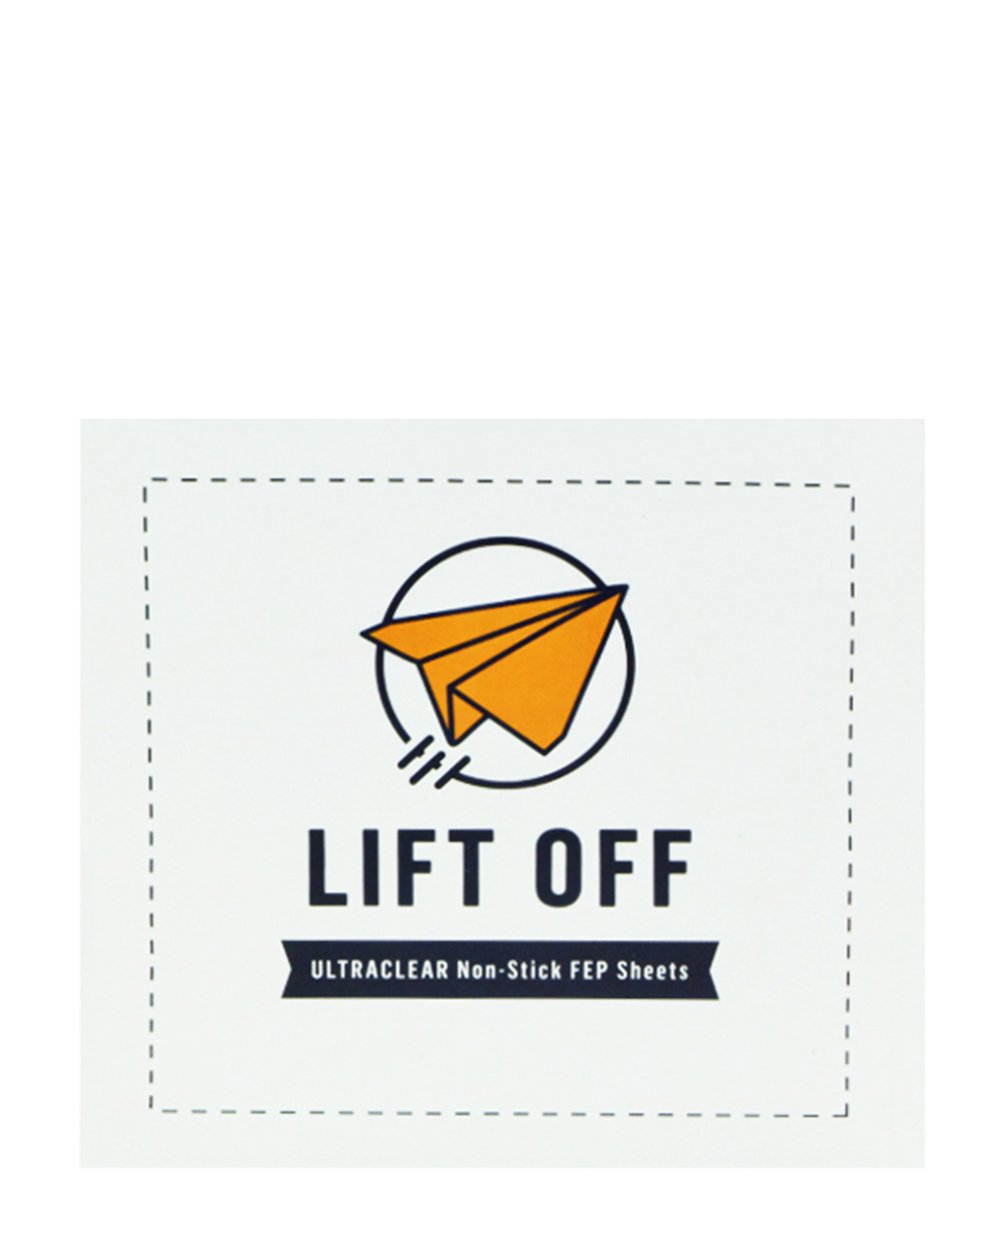 LIFT OFF | Ultraclear Non-Stick FEP Sheets | 4in x 4in | Sample - 1